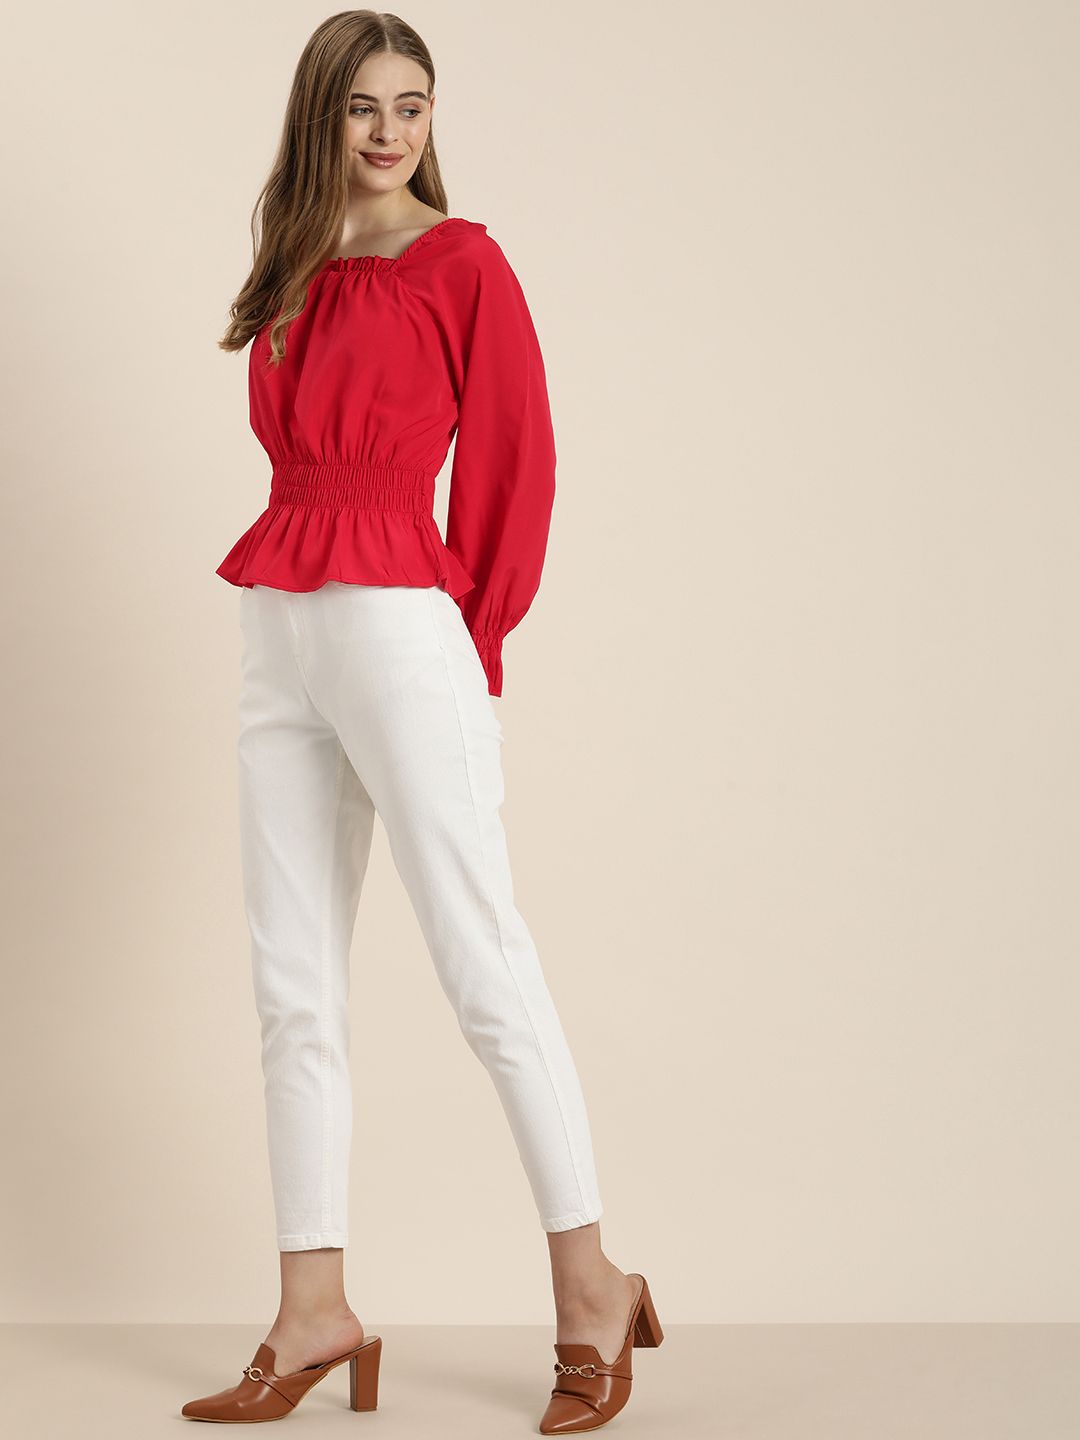 encore by INVICTUS Bell Sleeves Smocked Detail Peplum Top Price in India